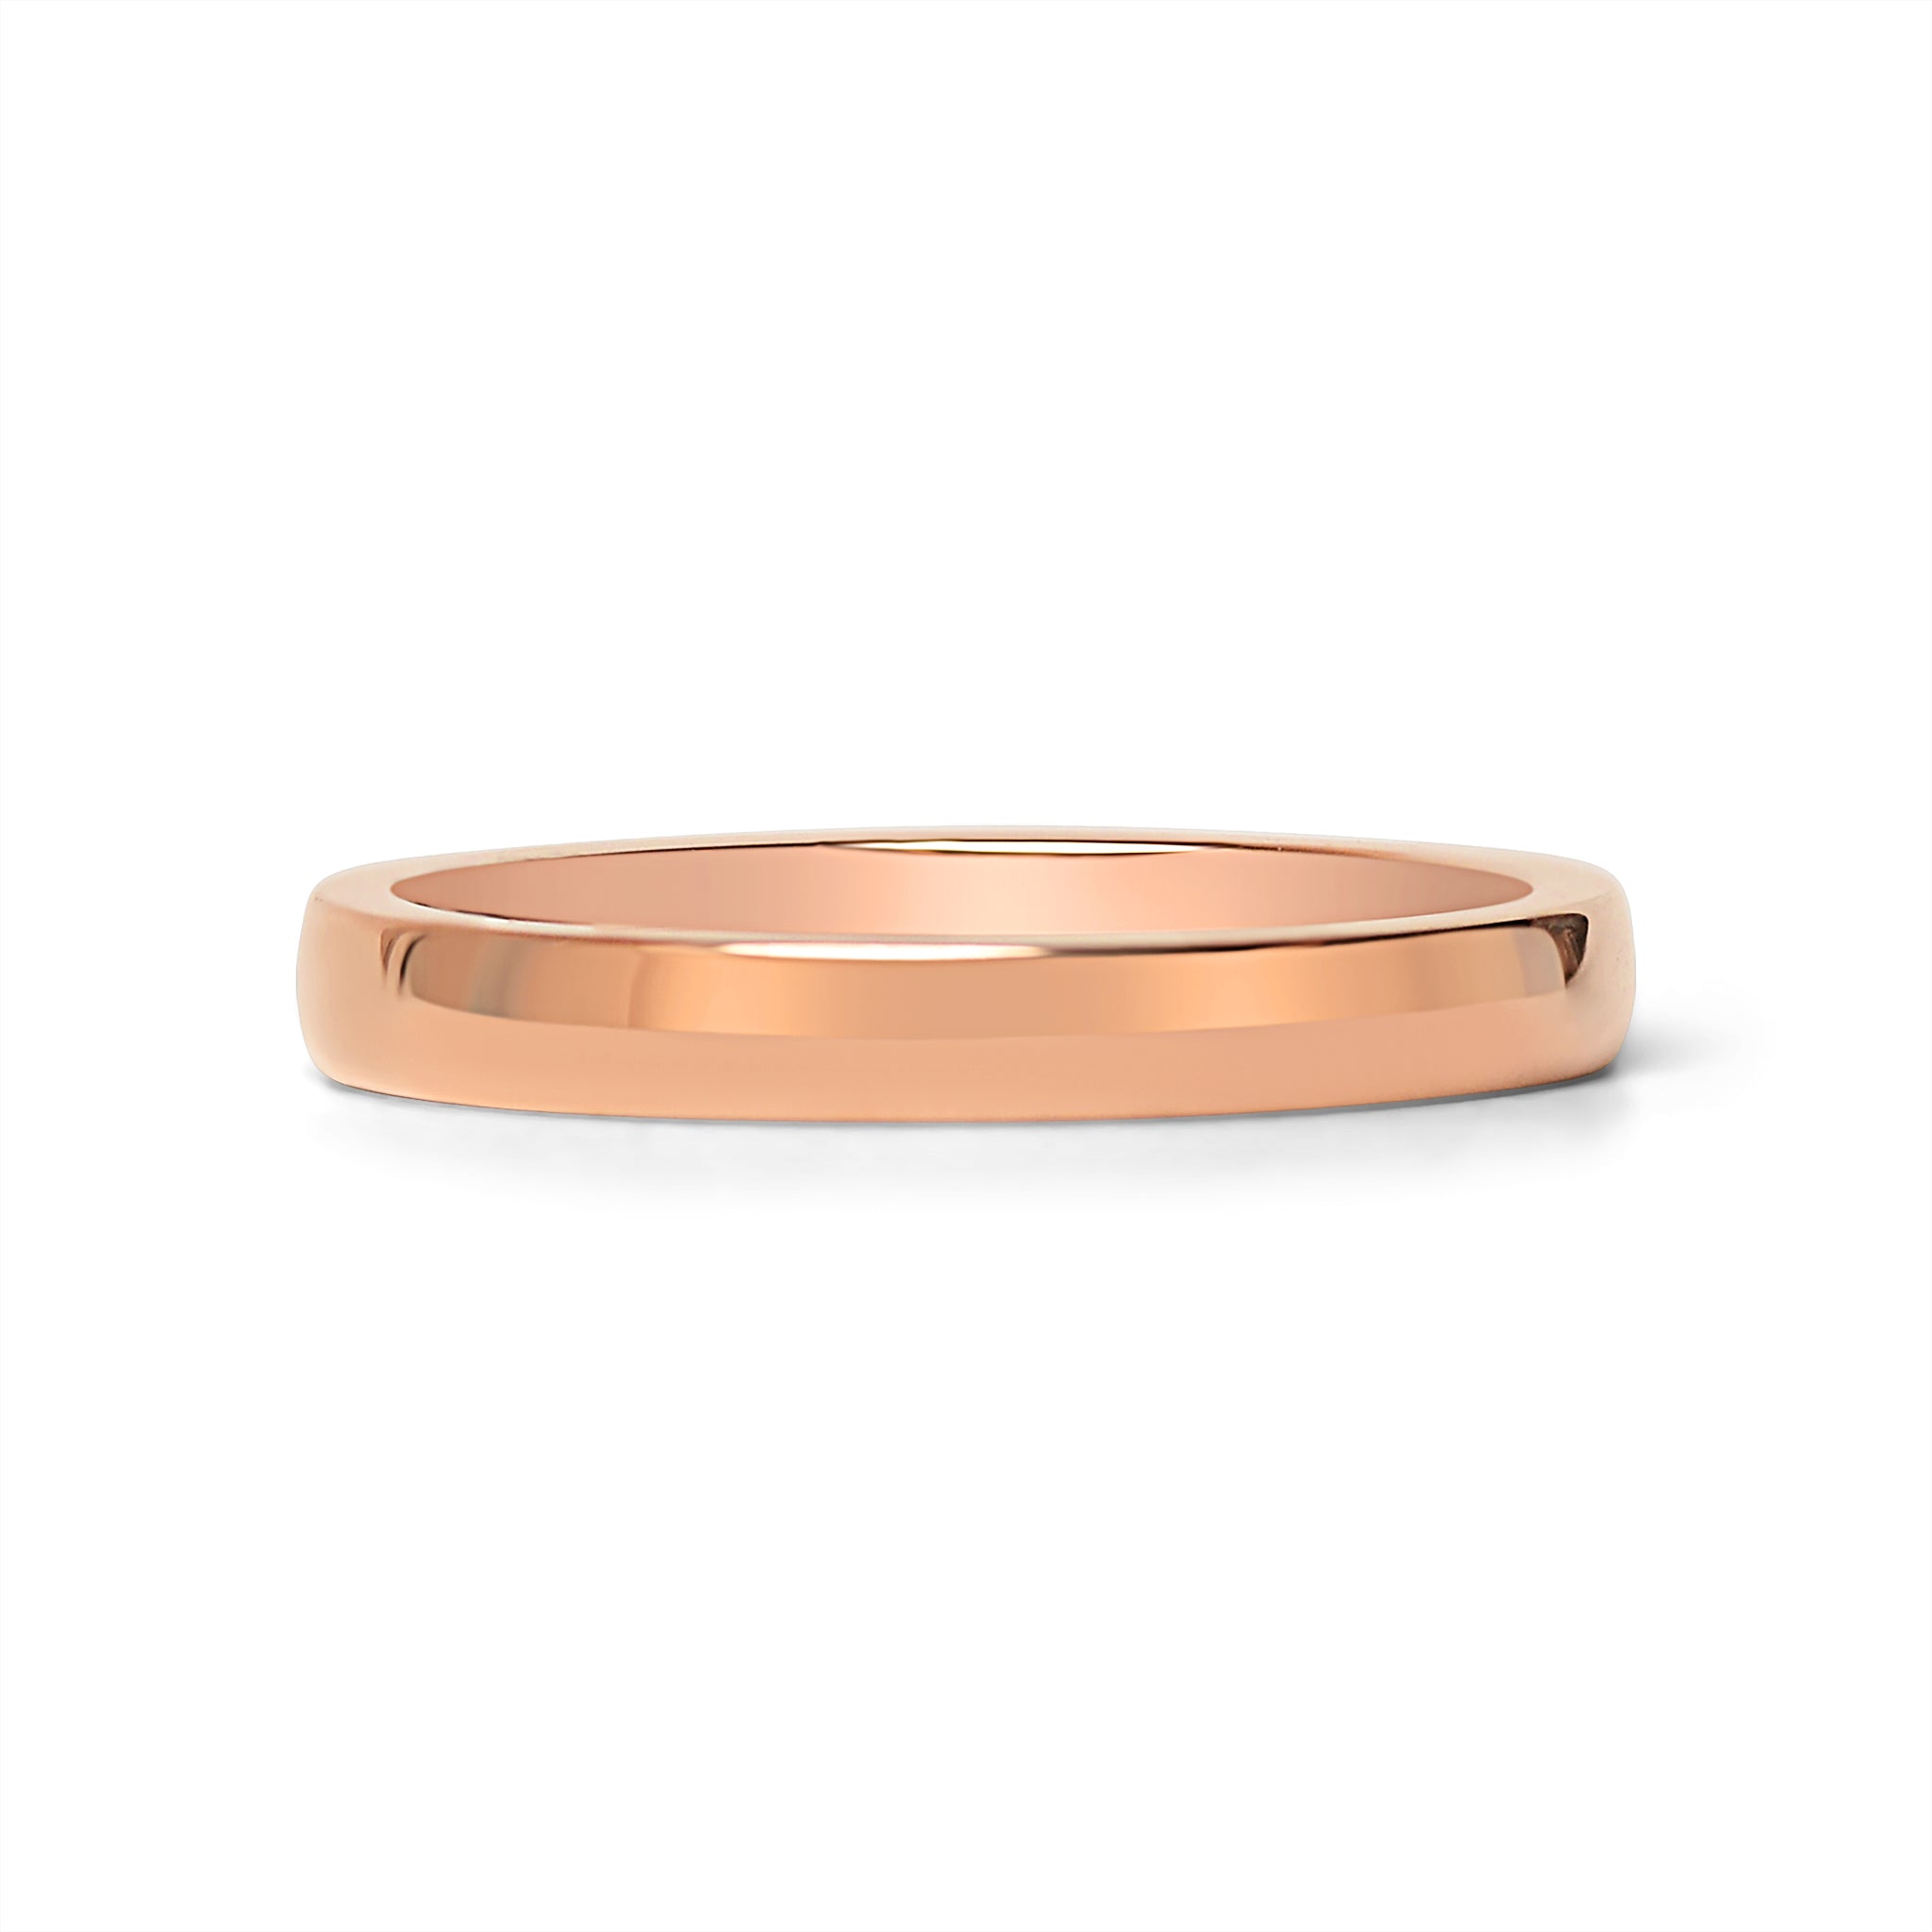 Rings Rose Gold Stainless Steel Ring Cfr7008 3mm / 10 Wholesale Jewelry Website 10 Unisex